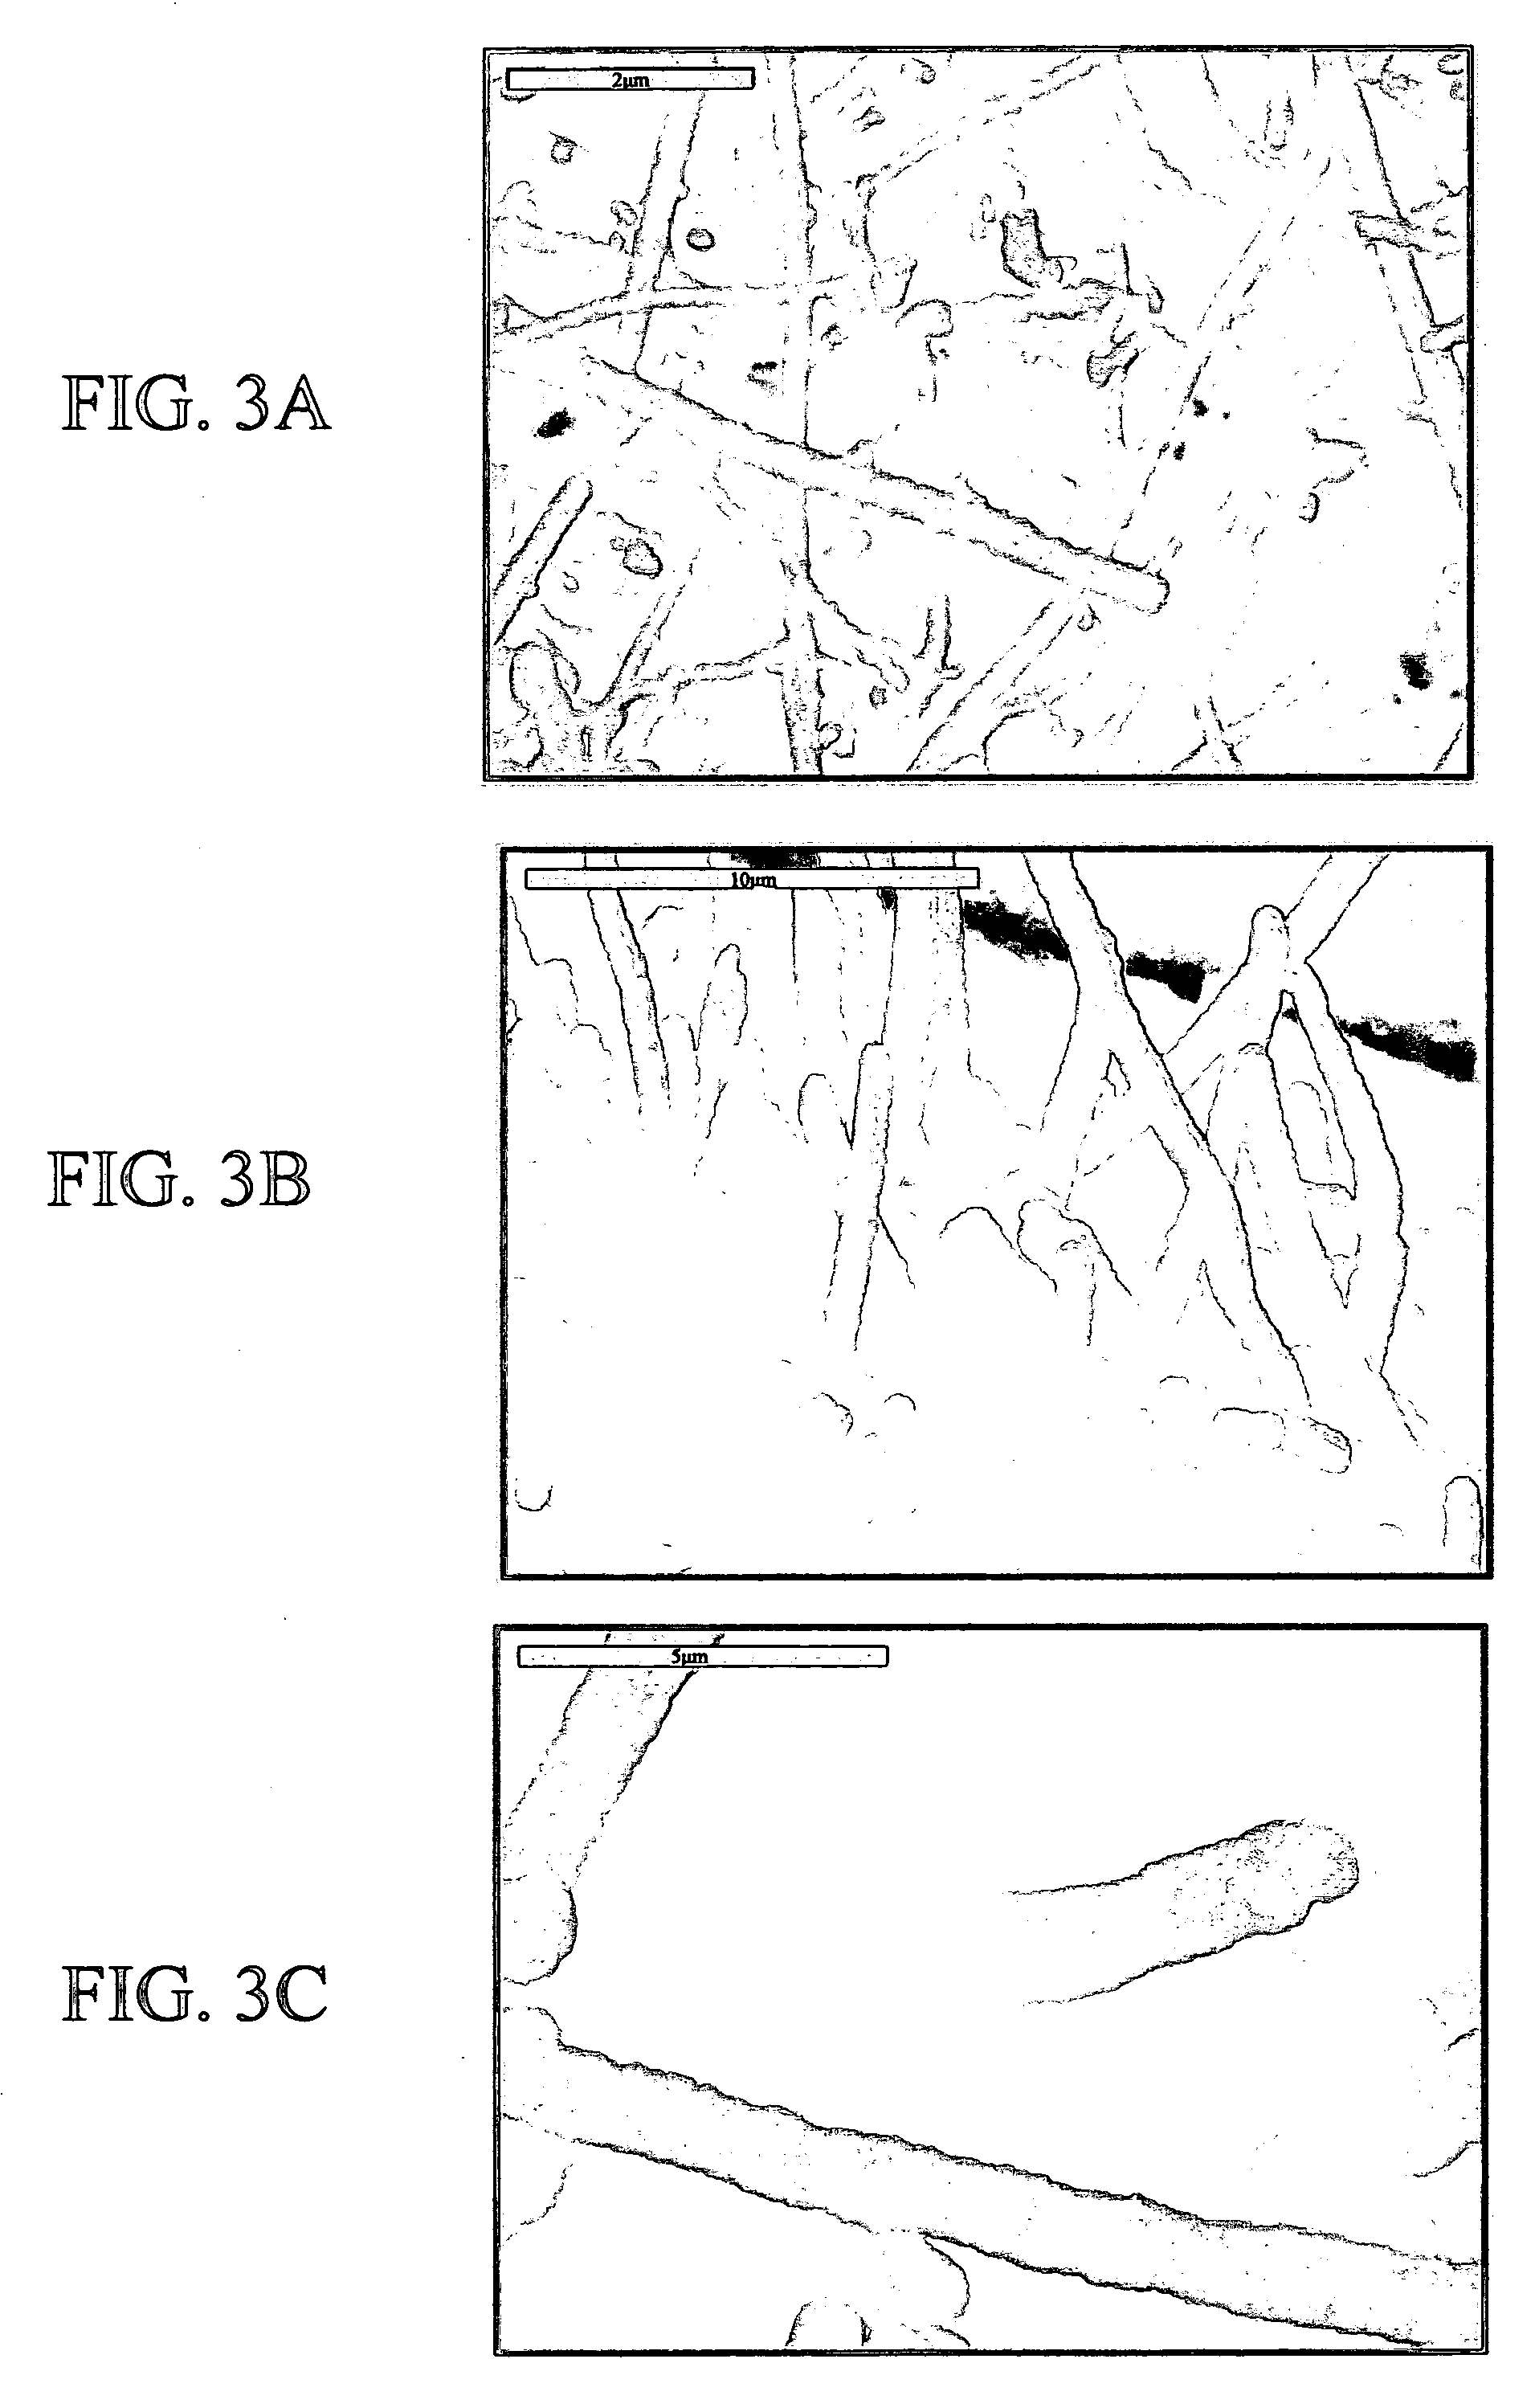 Fibrous minerals, methods for their production using a solution-precursor-solid mechanism, and methods of use